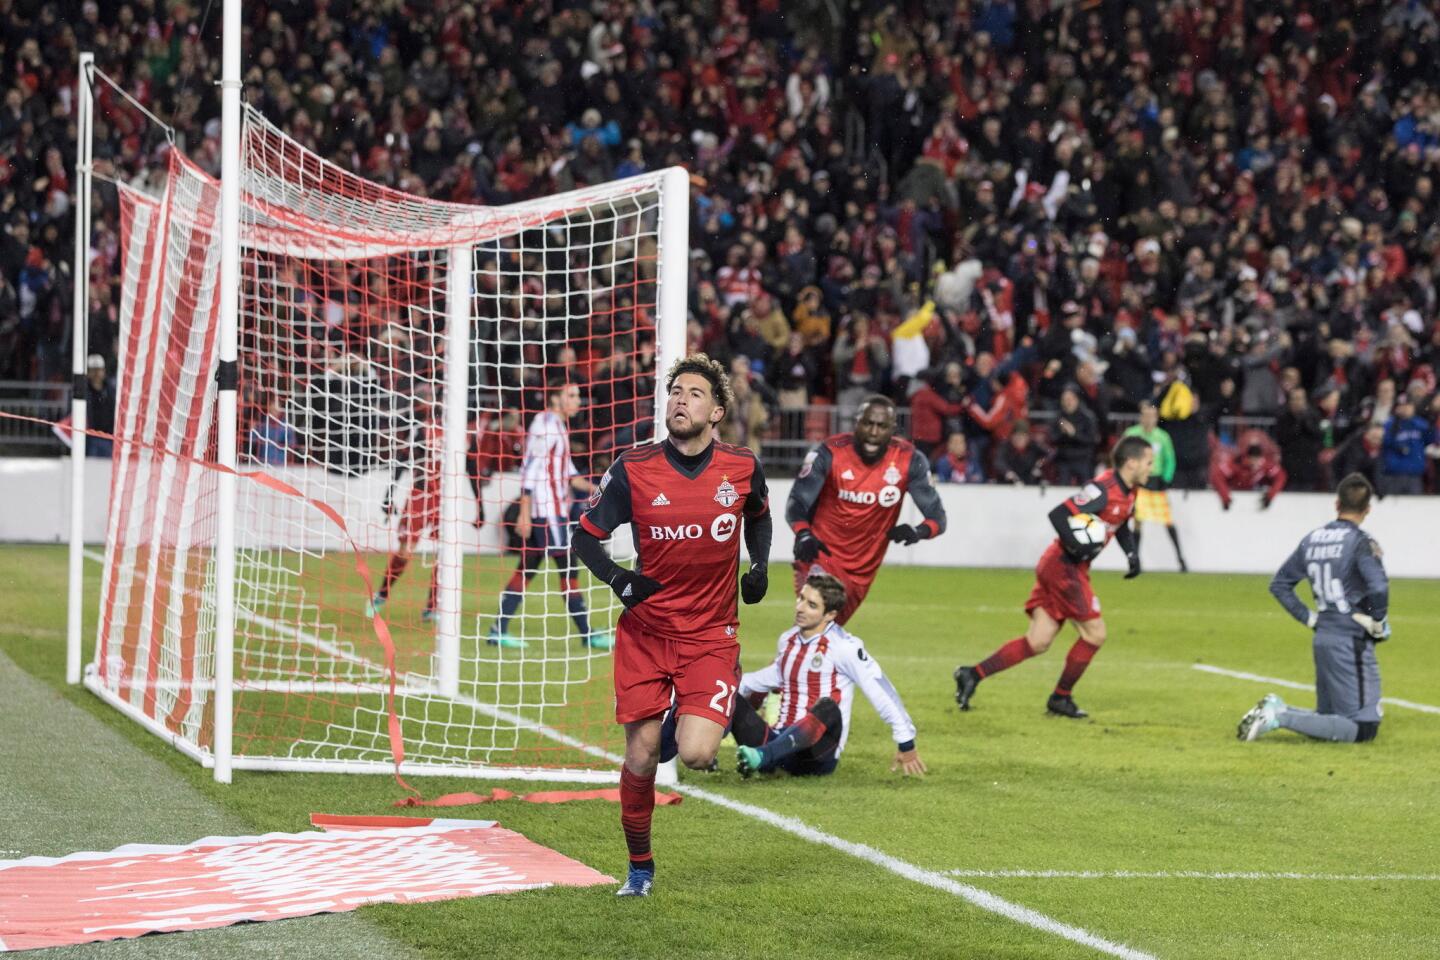 Toronto FC midfielder Jonathan Osorio (21) celebrates after scoring against Chivas of Guadalajara during the first half in the first leg of the CONCACAF Champions League soccer final, Tuesday, April 17, 2018, in Toronto. (Chris Young/The Canadian Press via AP)